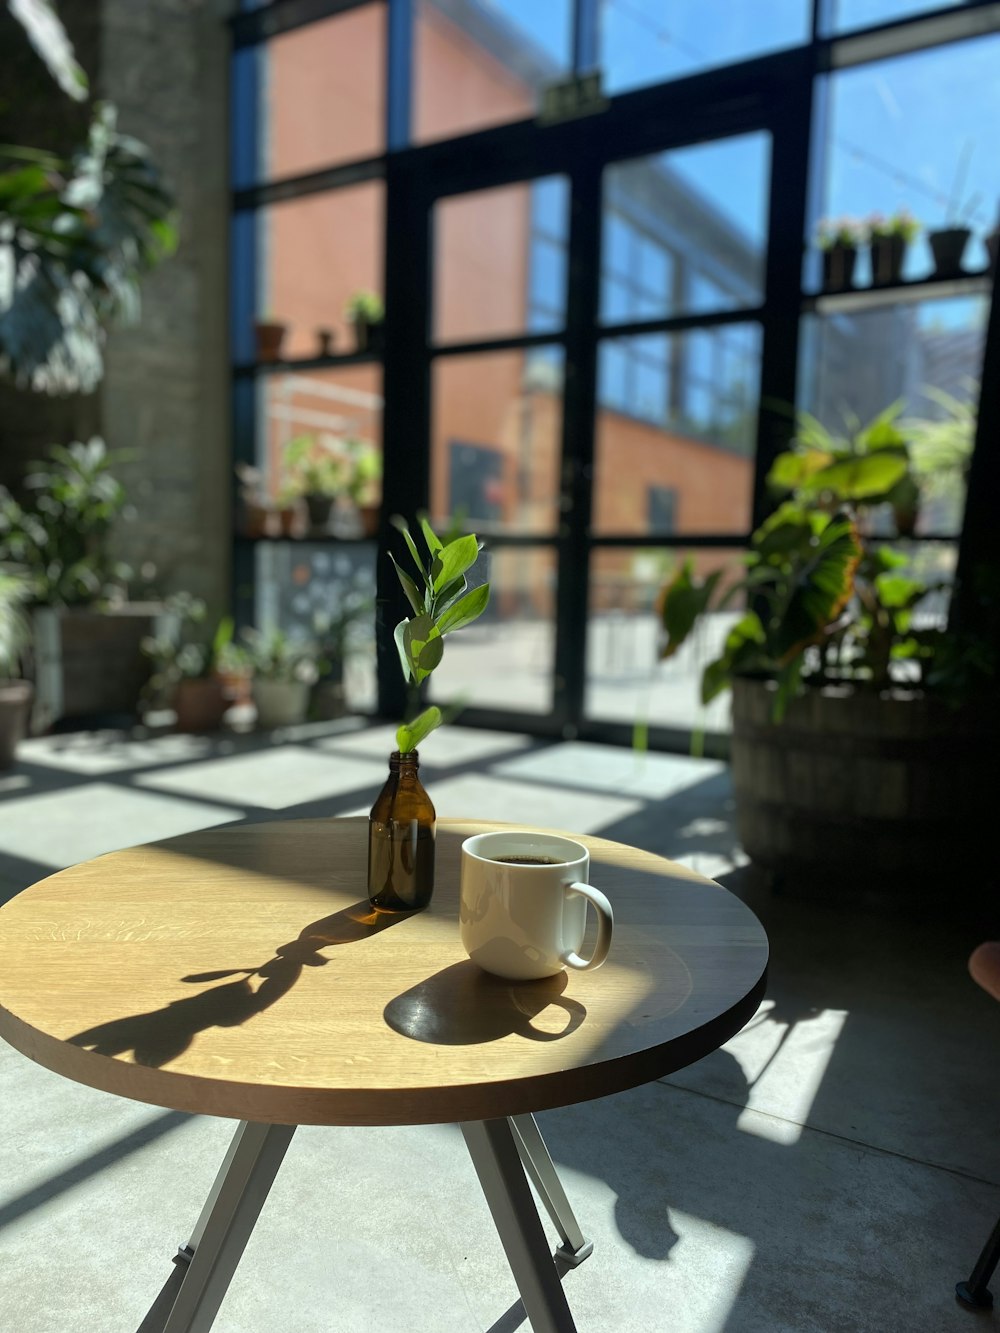 a table with a coffee cup and a plant on it